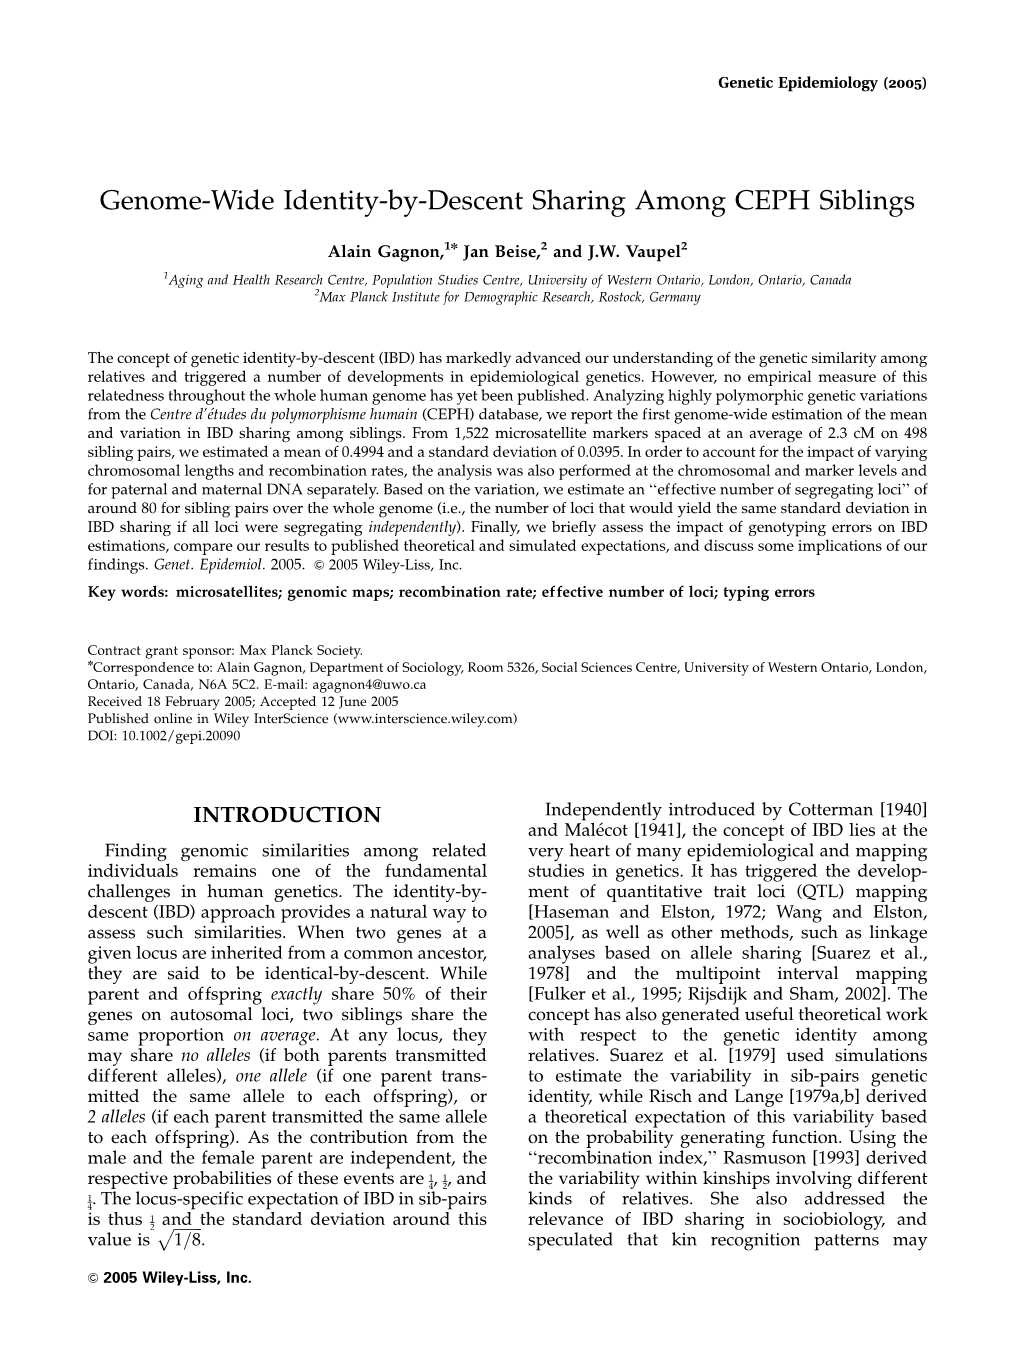 Genome-Wide Identity-By-Descent Sharing Among CEPH Siblings